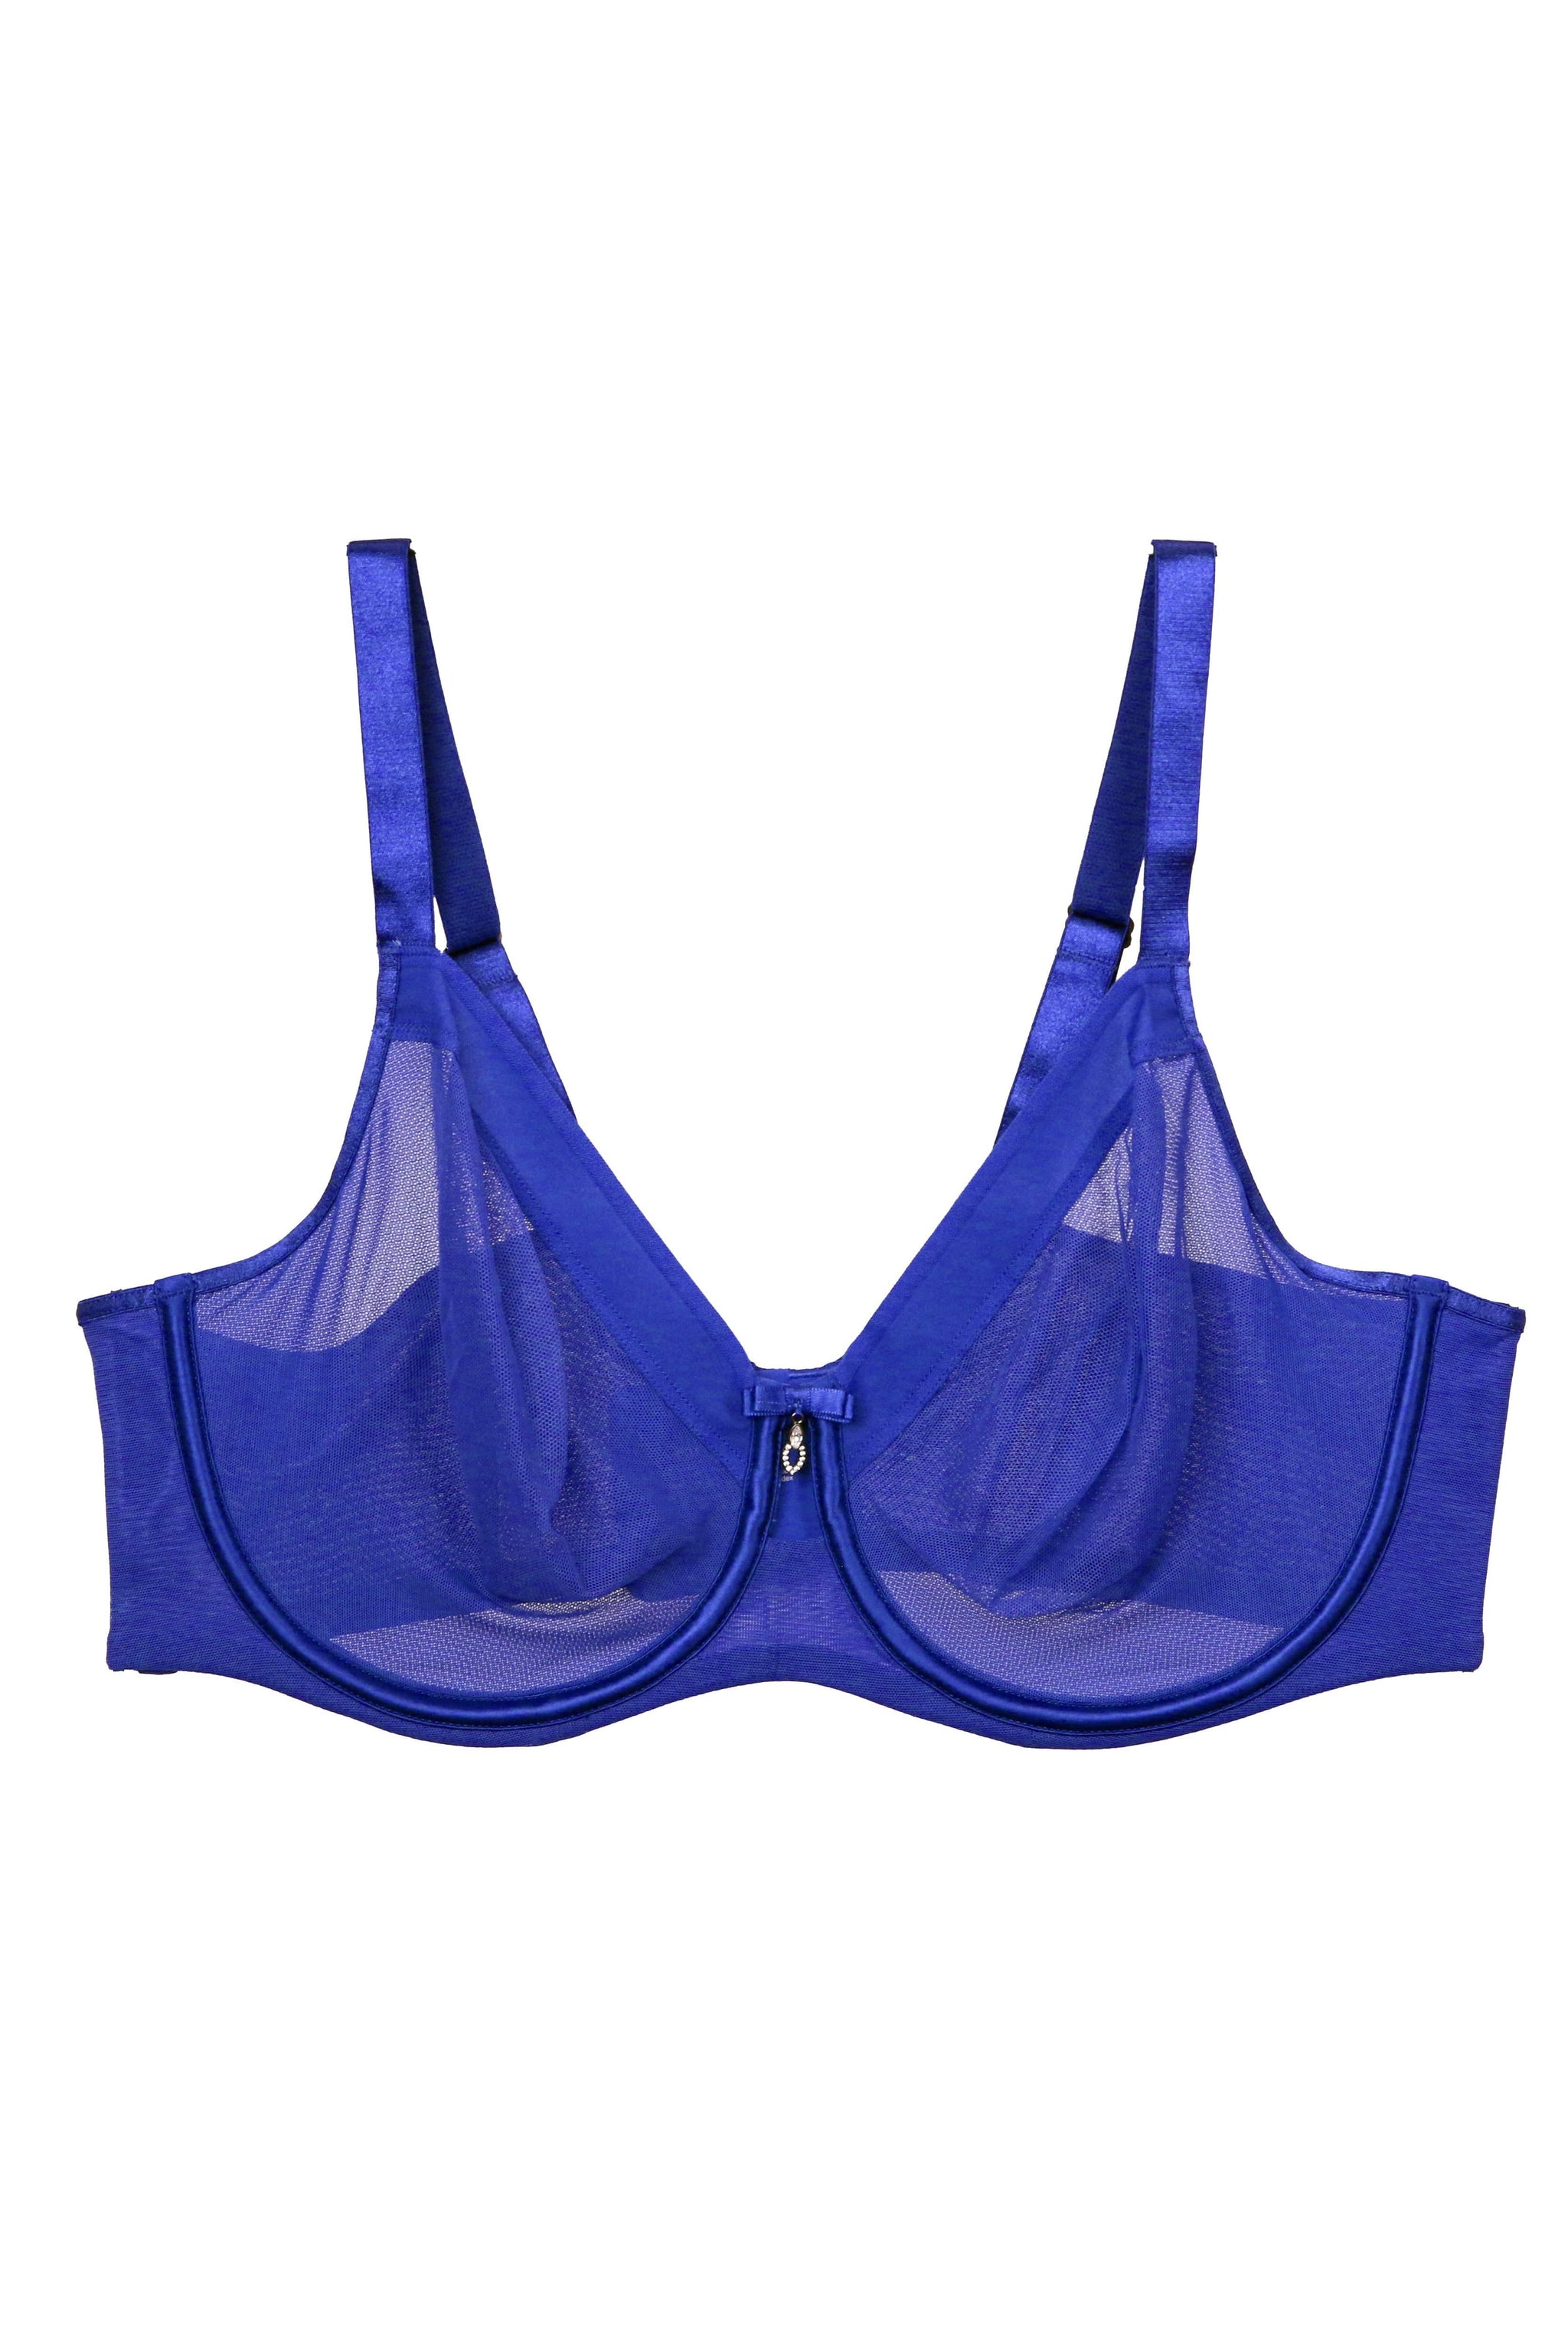 Sheer Mesh Unlined Underwire Bra - Blue - Chérie Amour